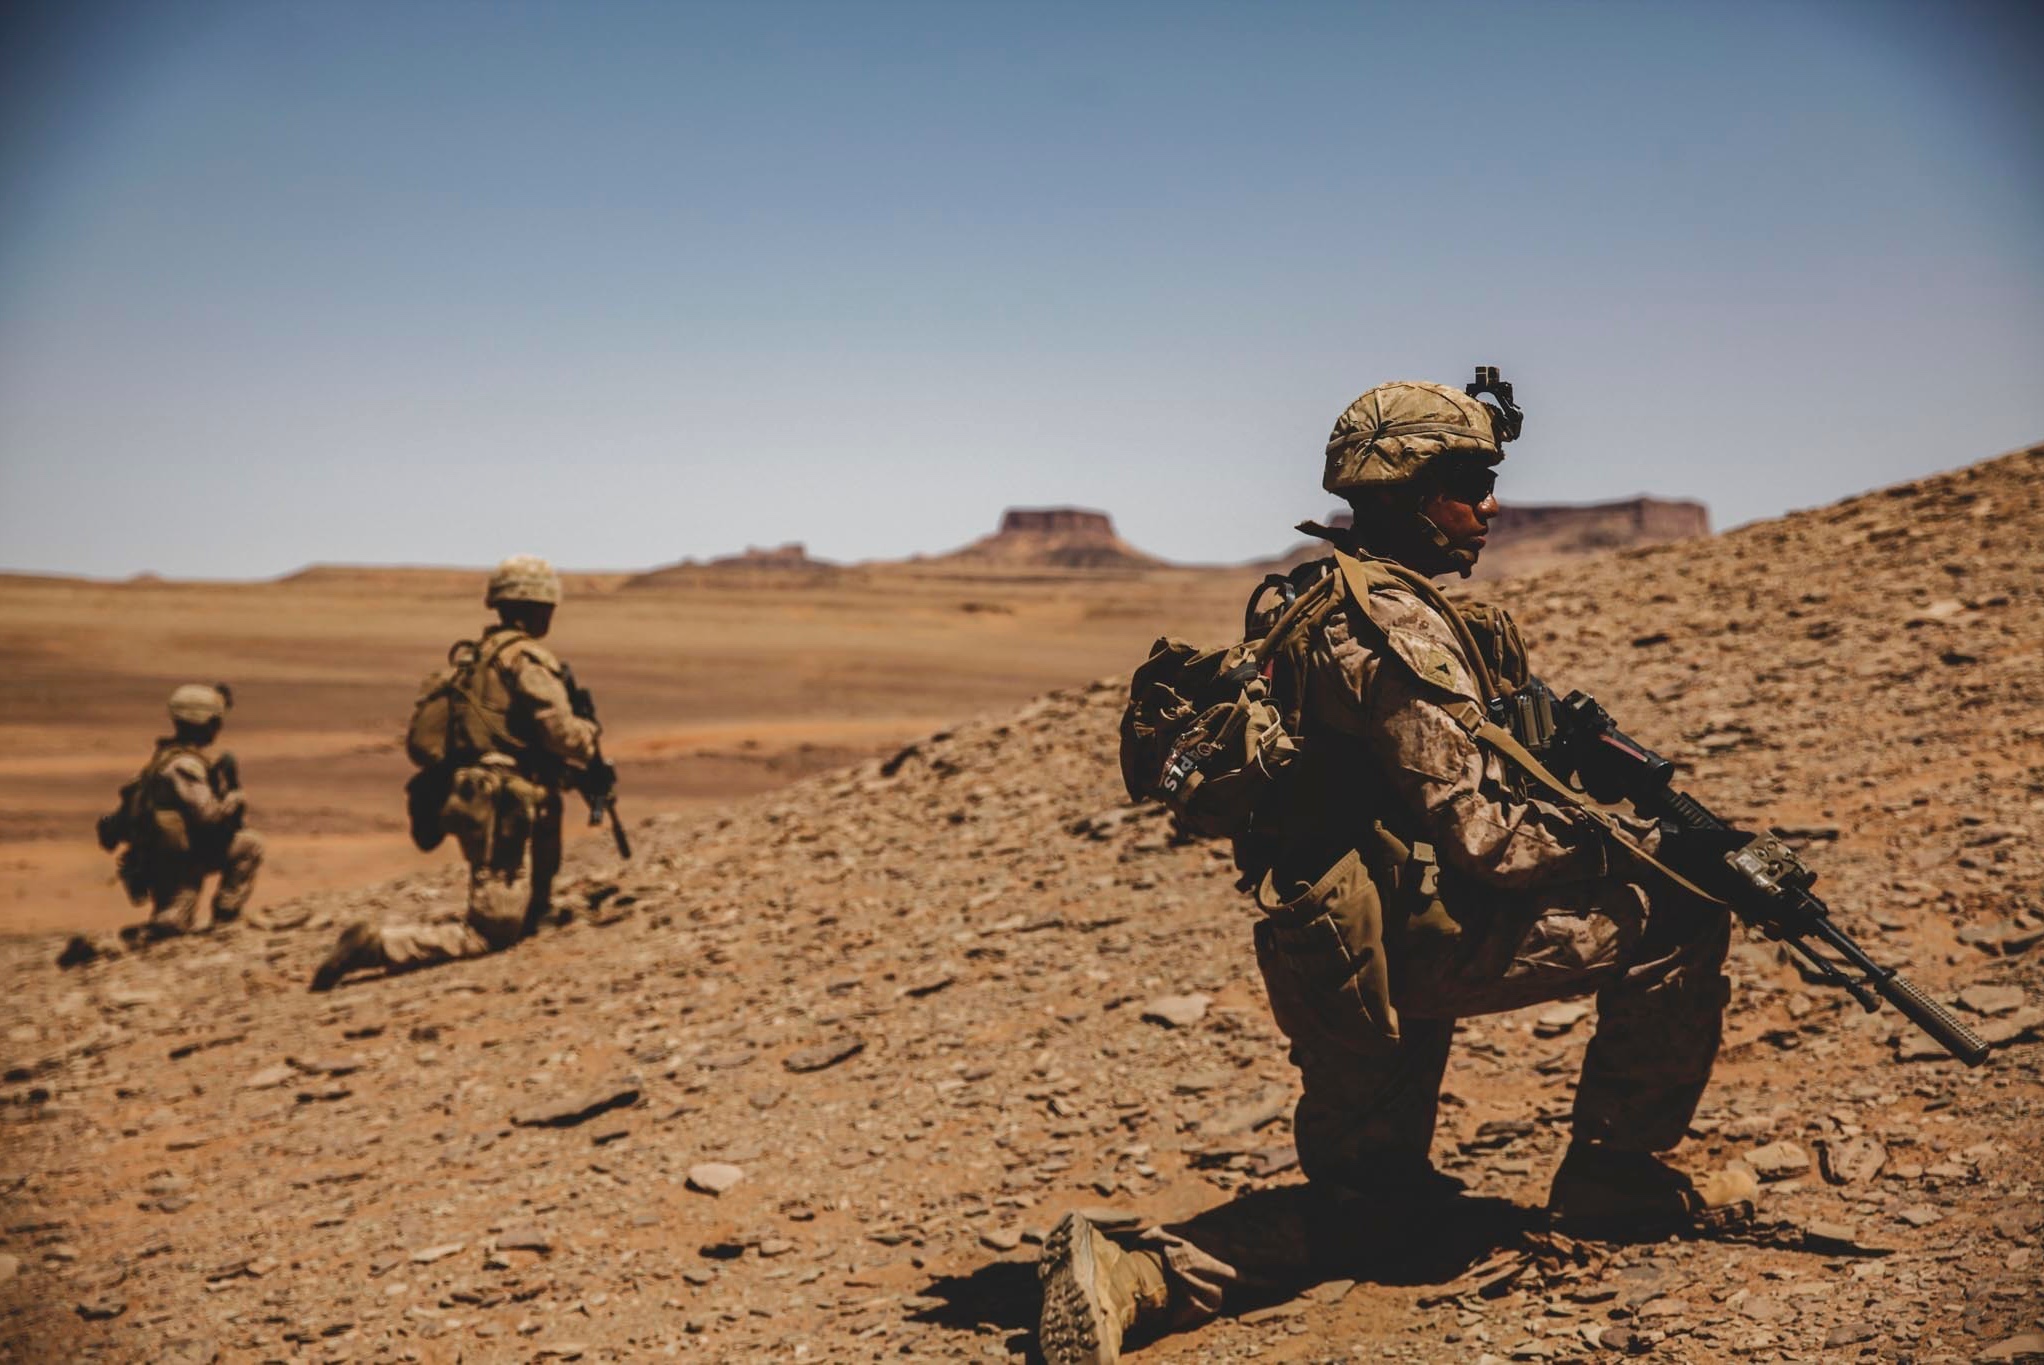 Marines assigned to the 24th Marine Expeditionary Unit (MEU) set security as part of live-fire training during a theater amphibious combat rehearsal (TACR) at Tabuk, Kingdom of Saudi Arabia